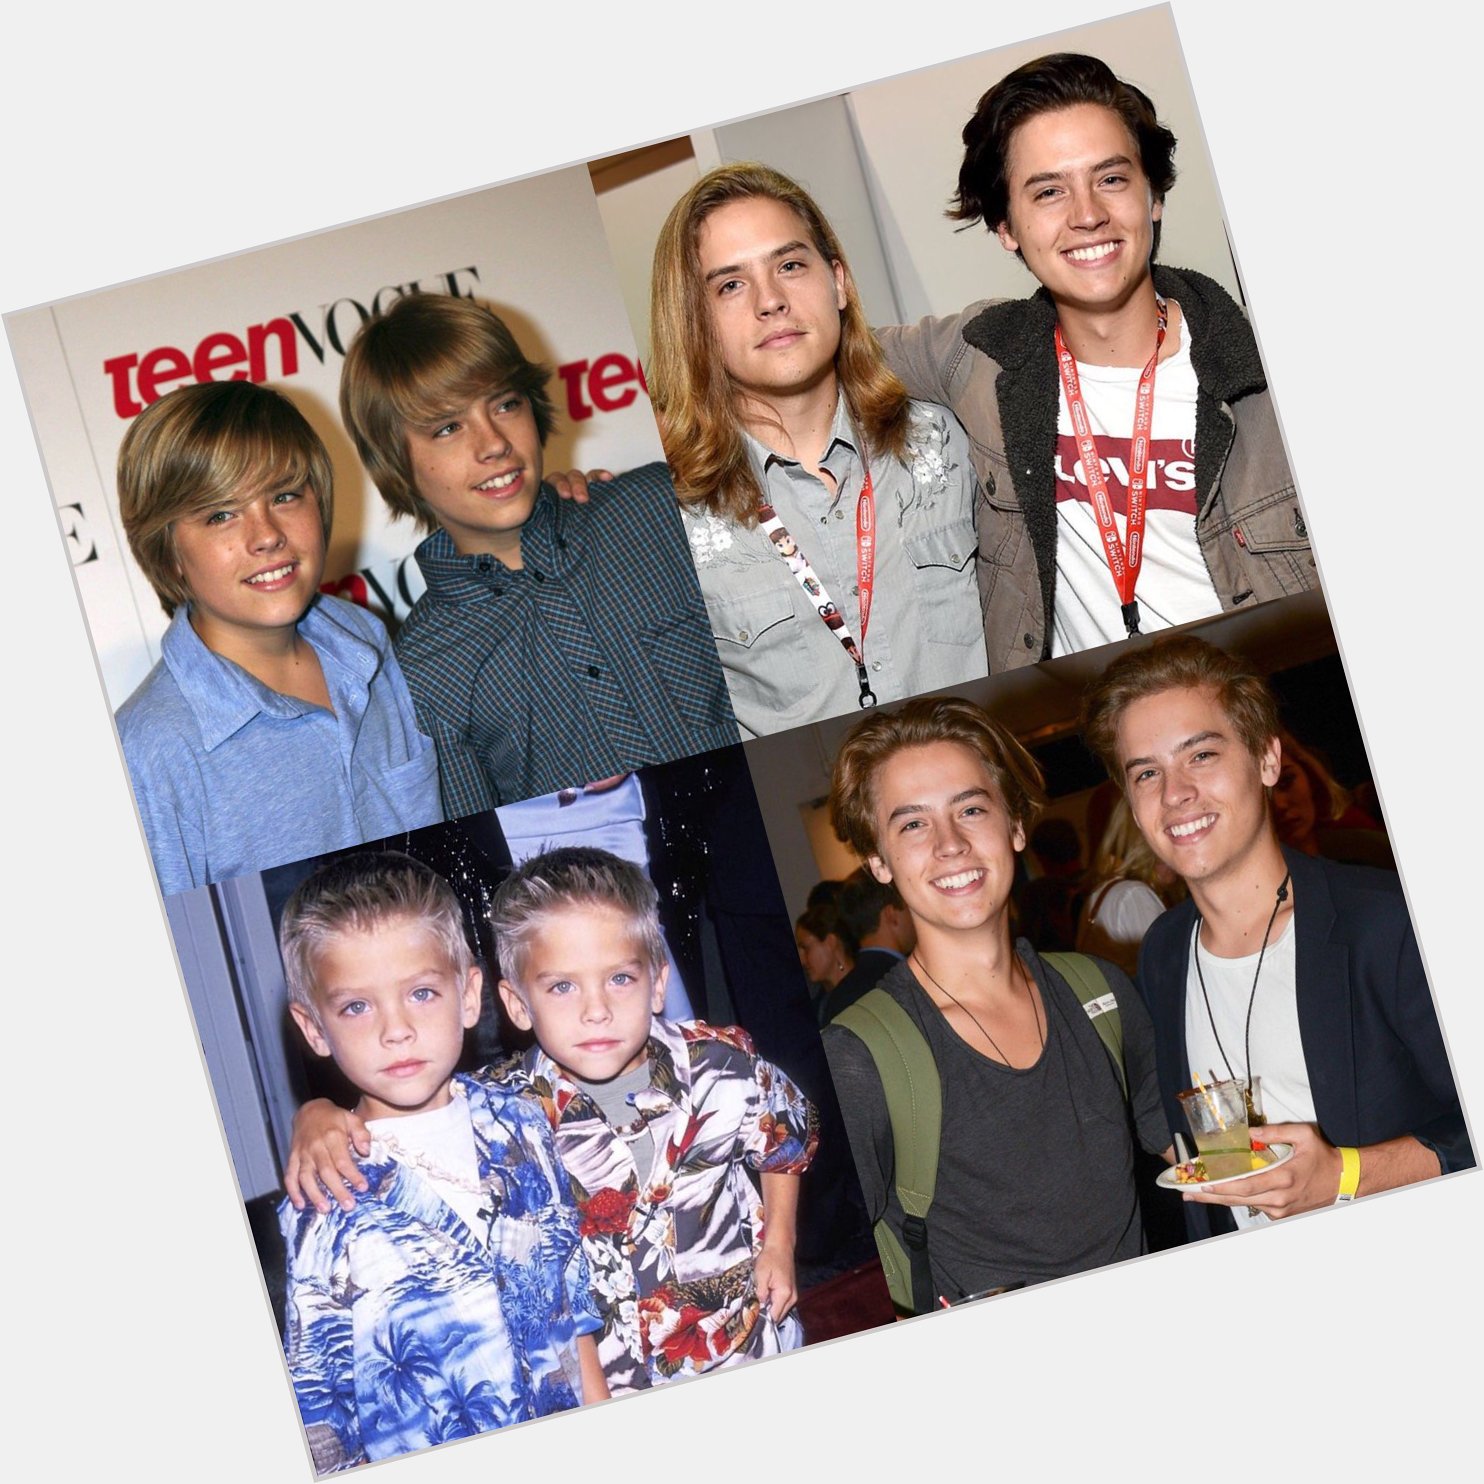 Happy 26 birthday to Cole and Dylan Sprouse  hope that they both have a wonderful birthday.     